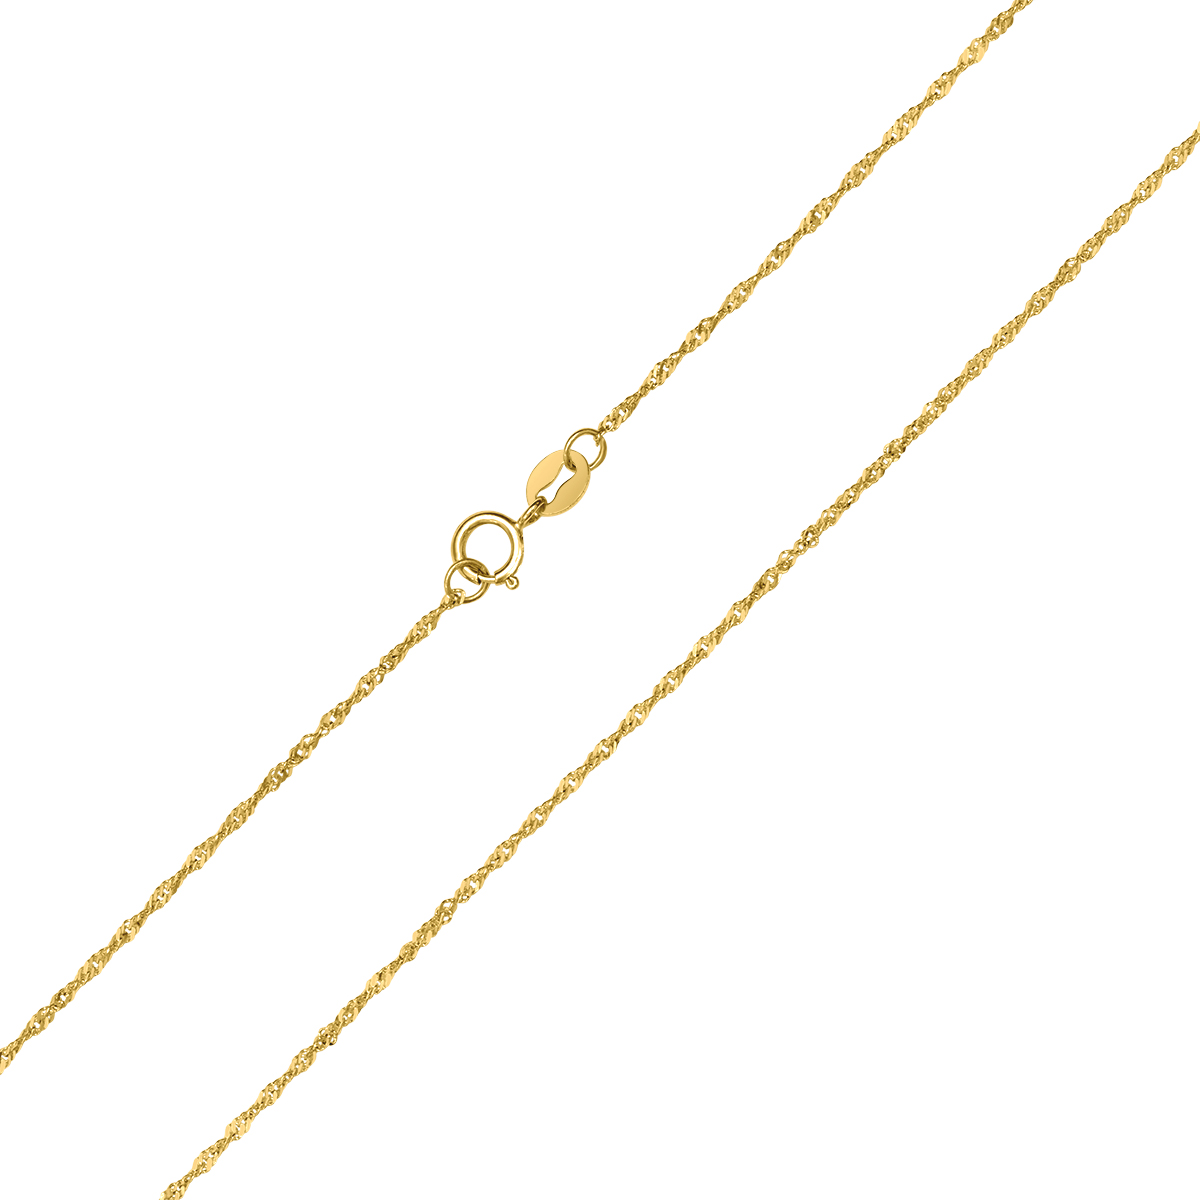 10K Yellow Gold 1MM Singapore Chain with Spring Ring Clasp - 18 Inch